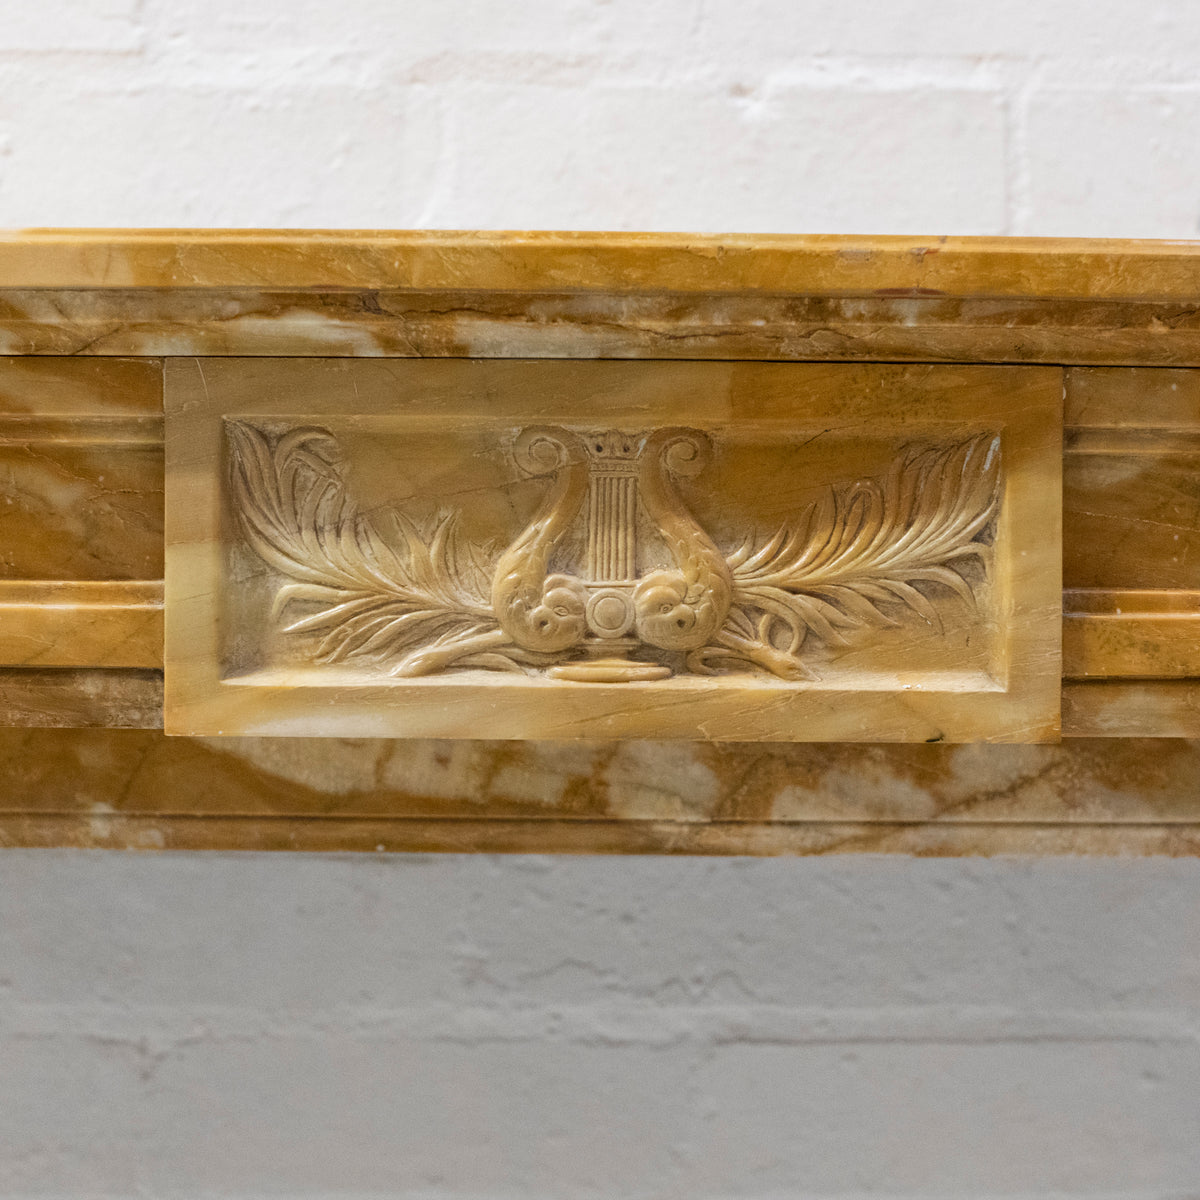 Late 19th Century French Style Sienna Marble Chimneypiece | The Architectural Forum